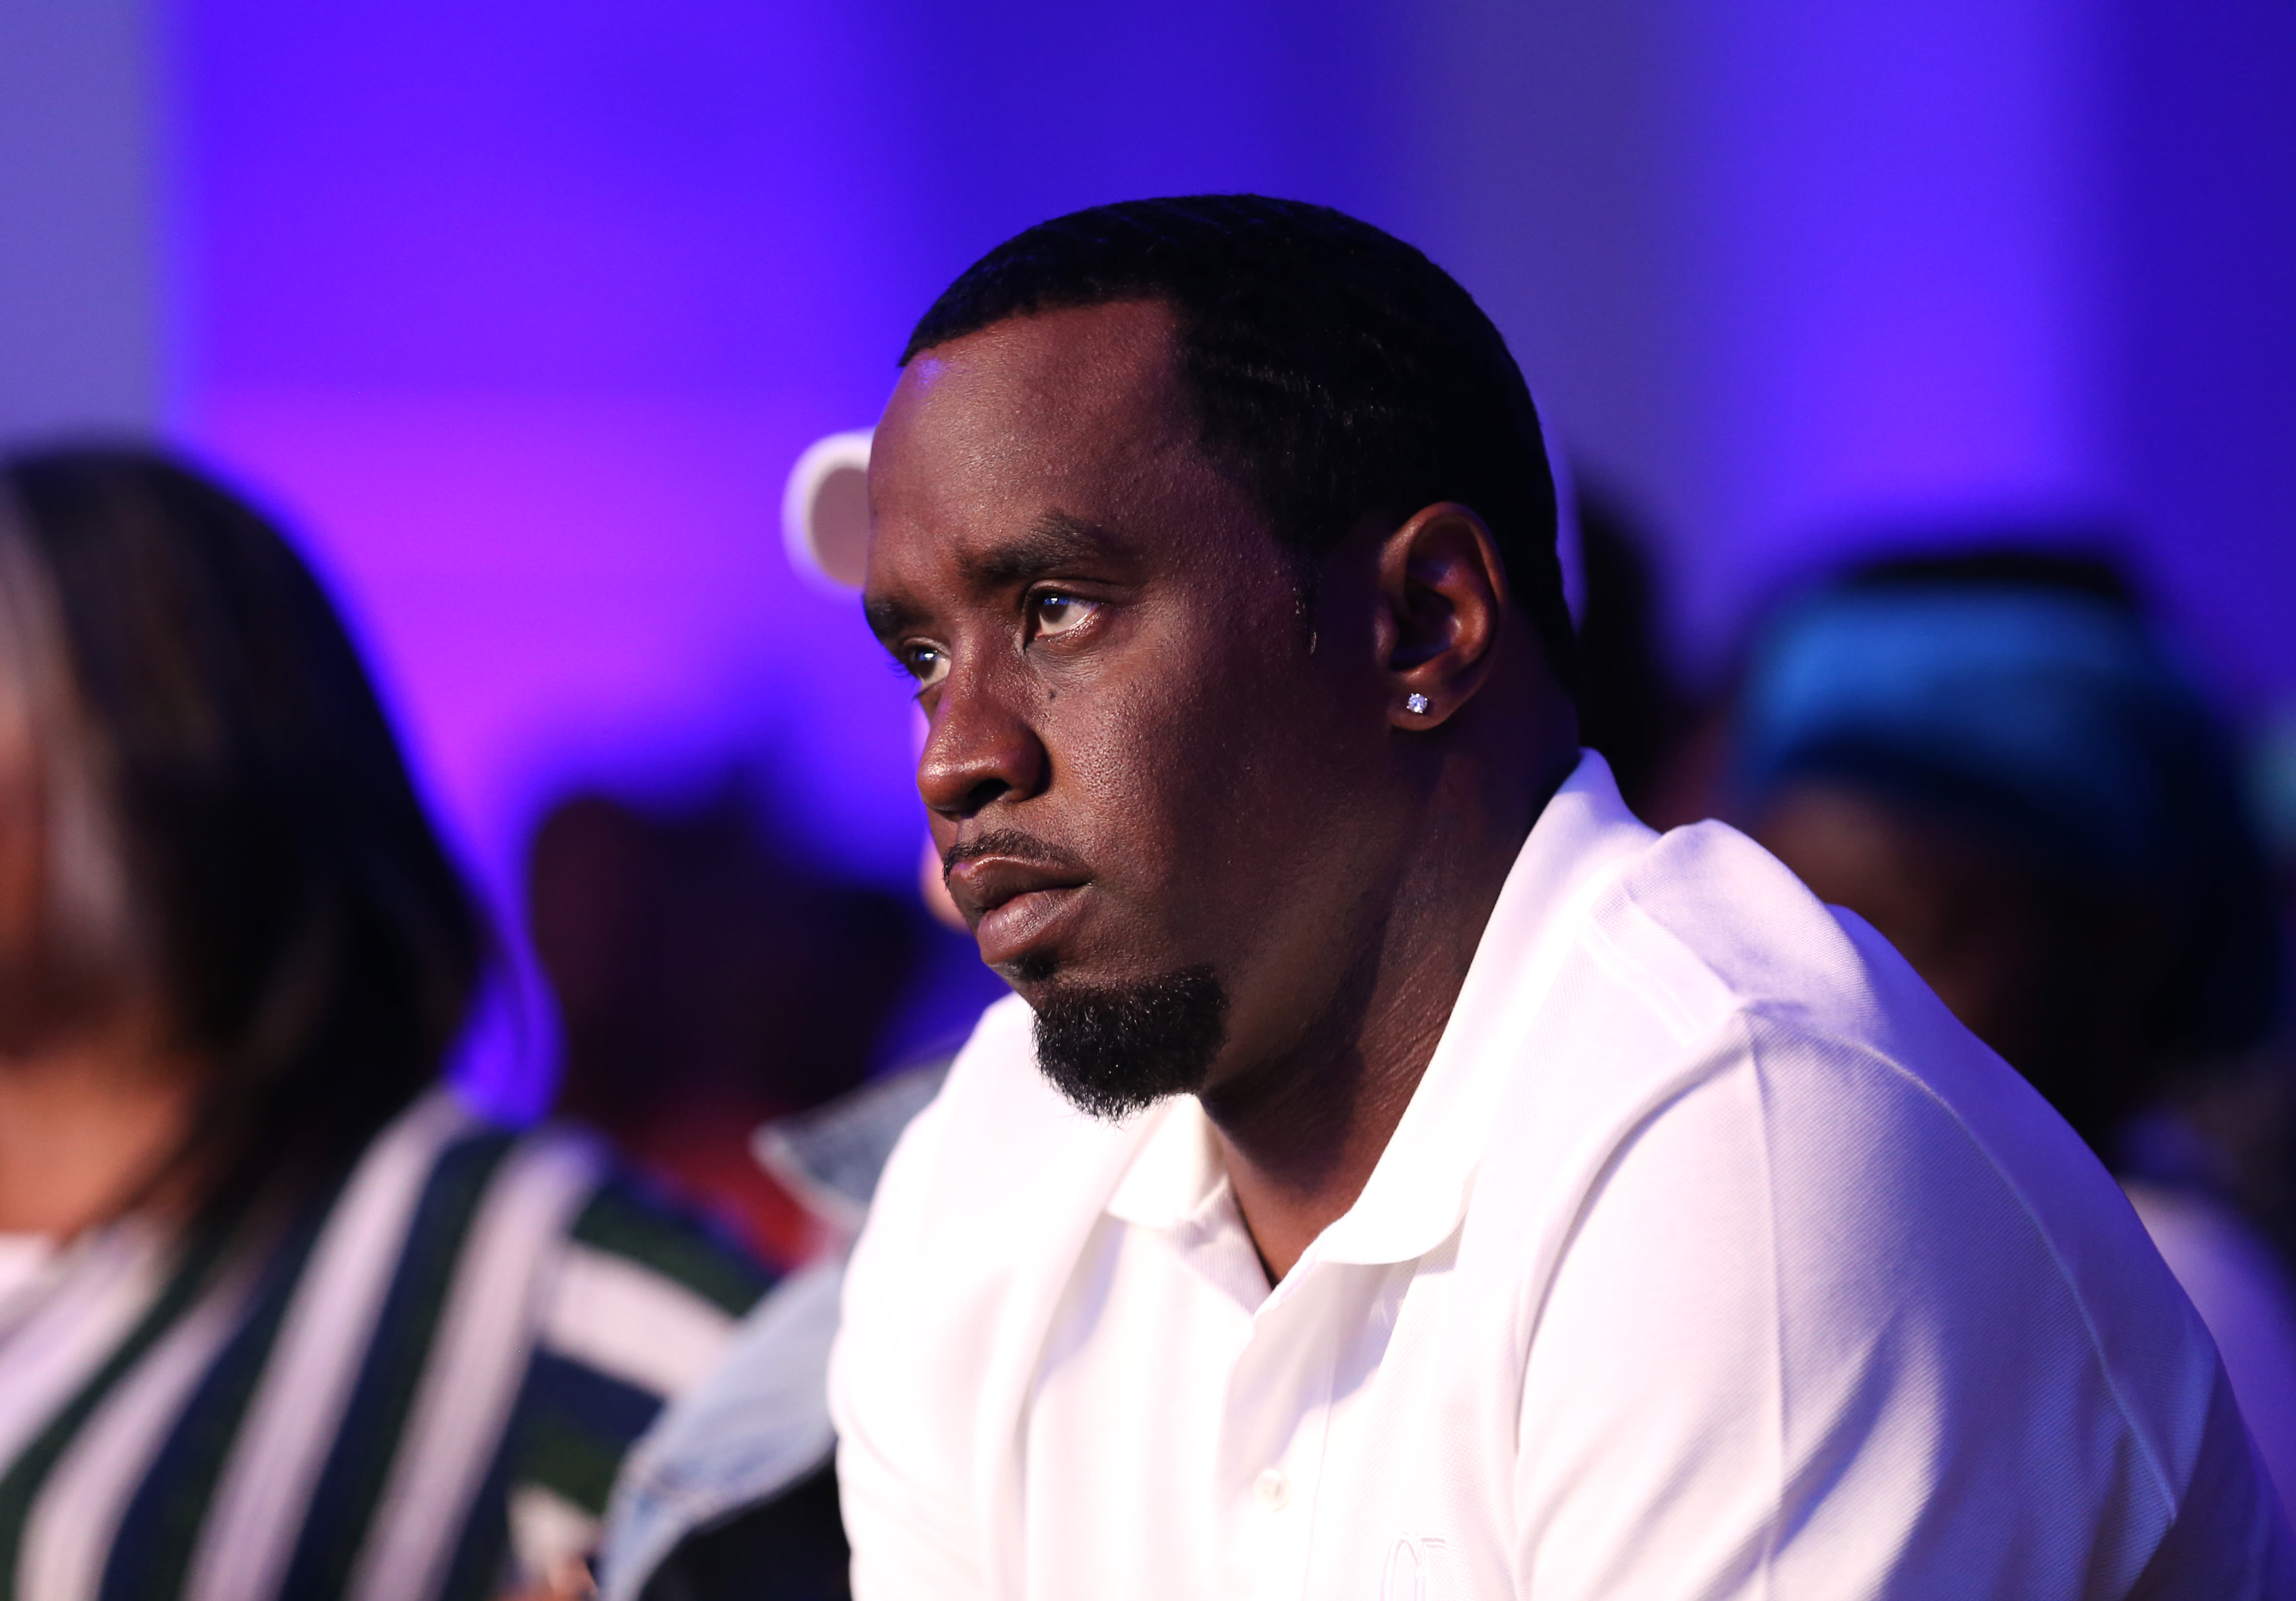 Howard University Retracts Sean ‘Diddy’ Combs’ Honorary Degree